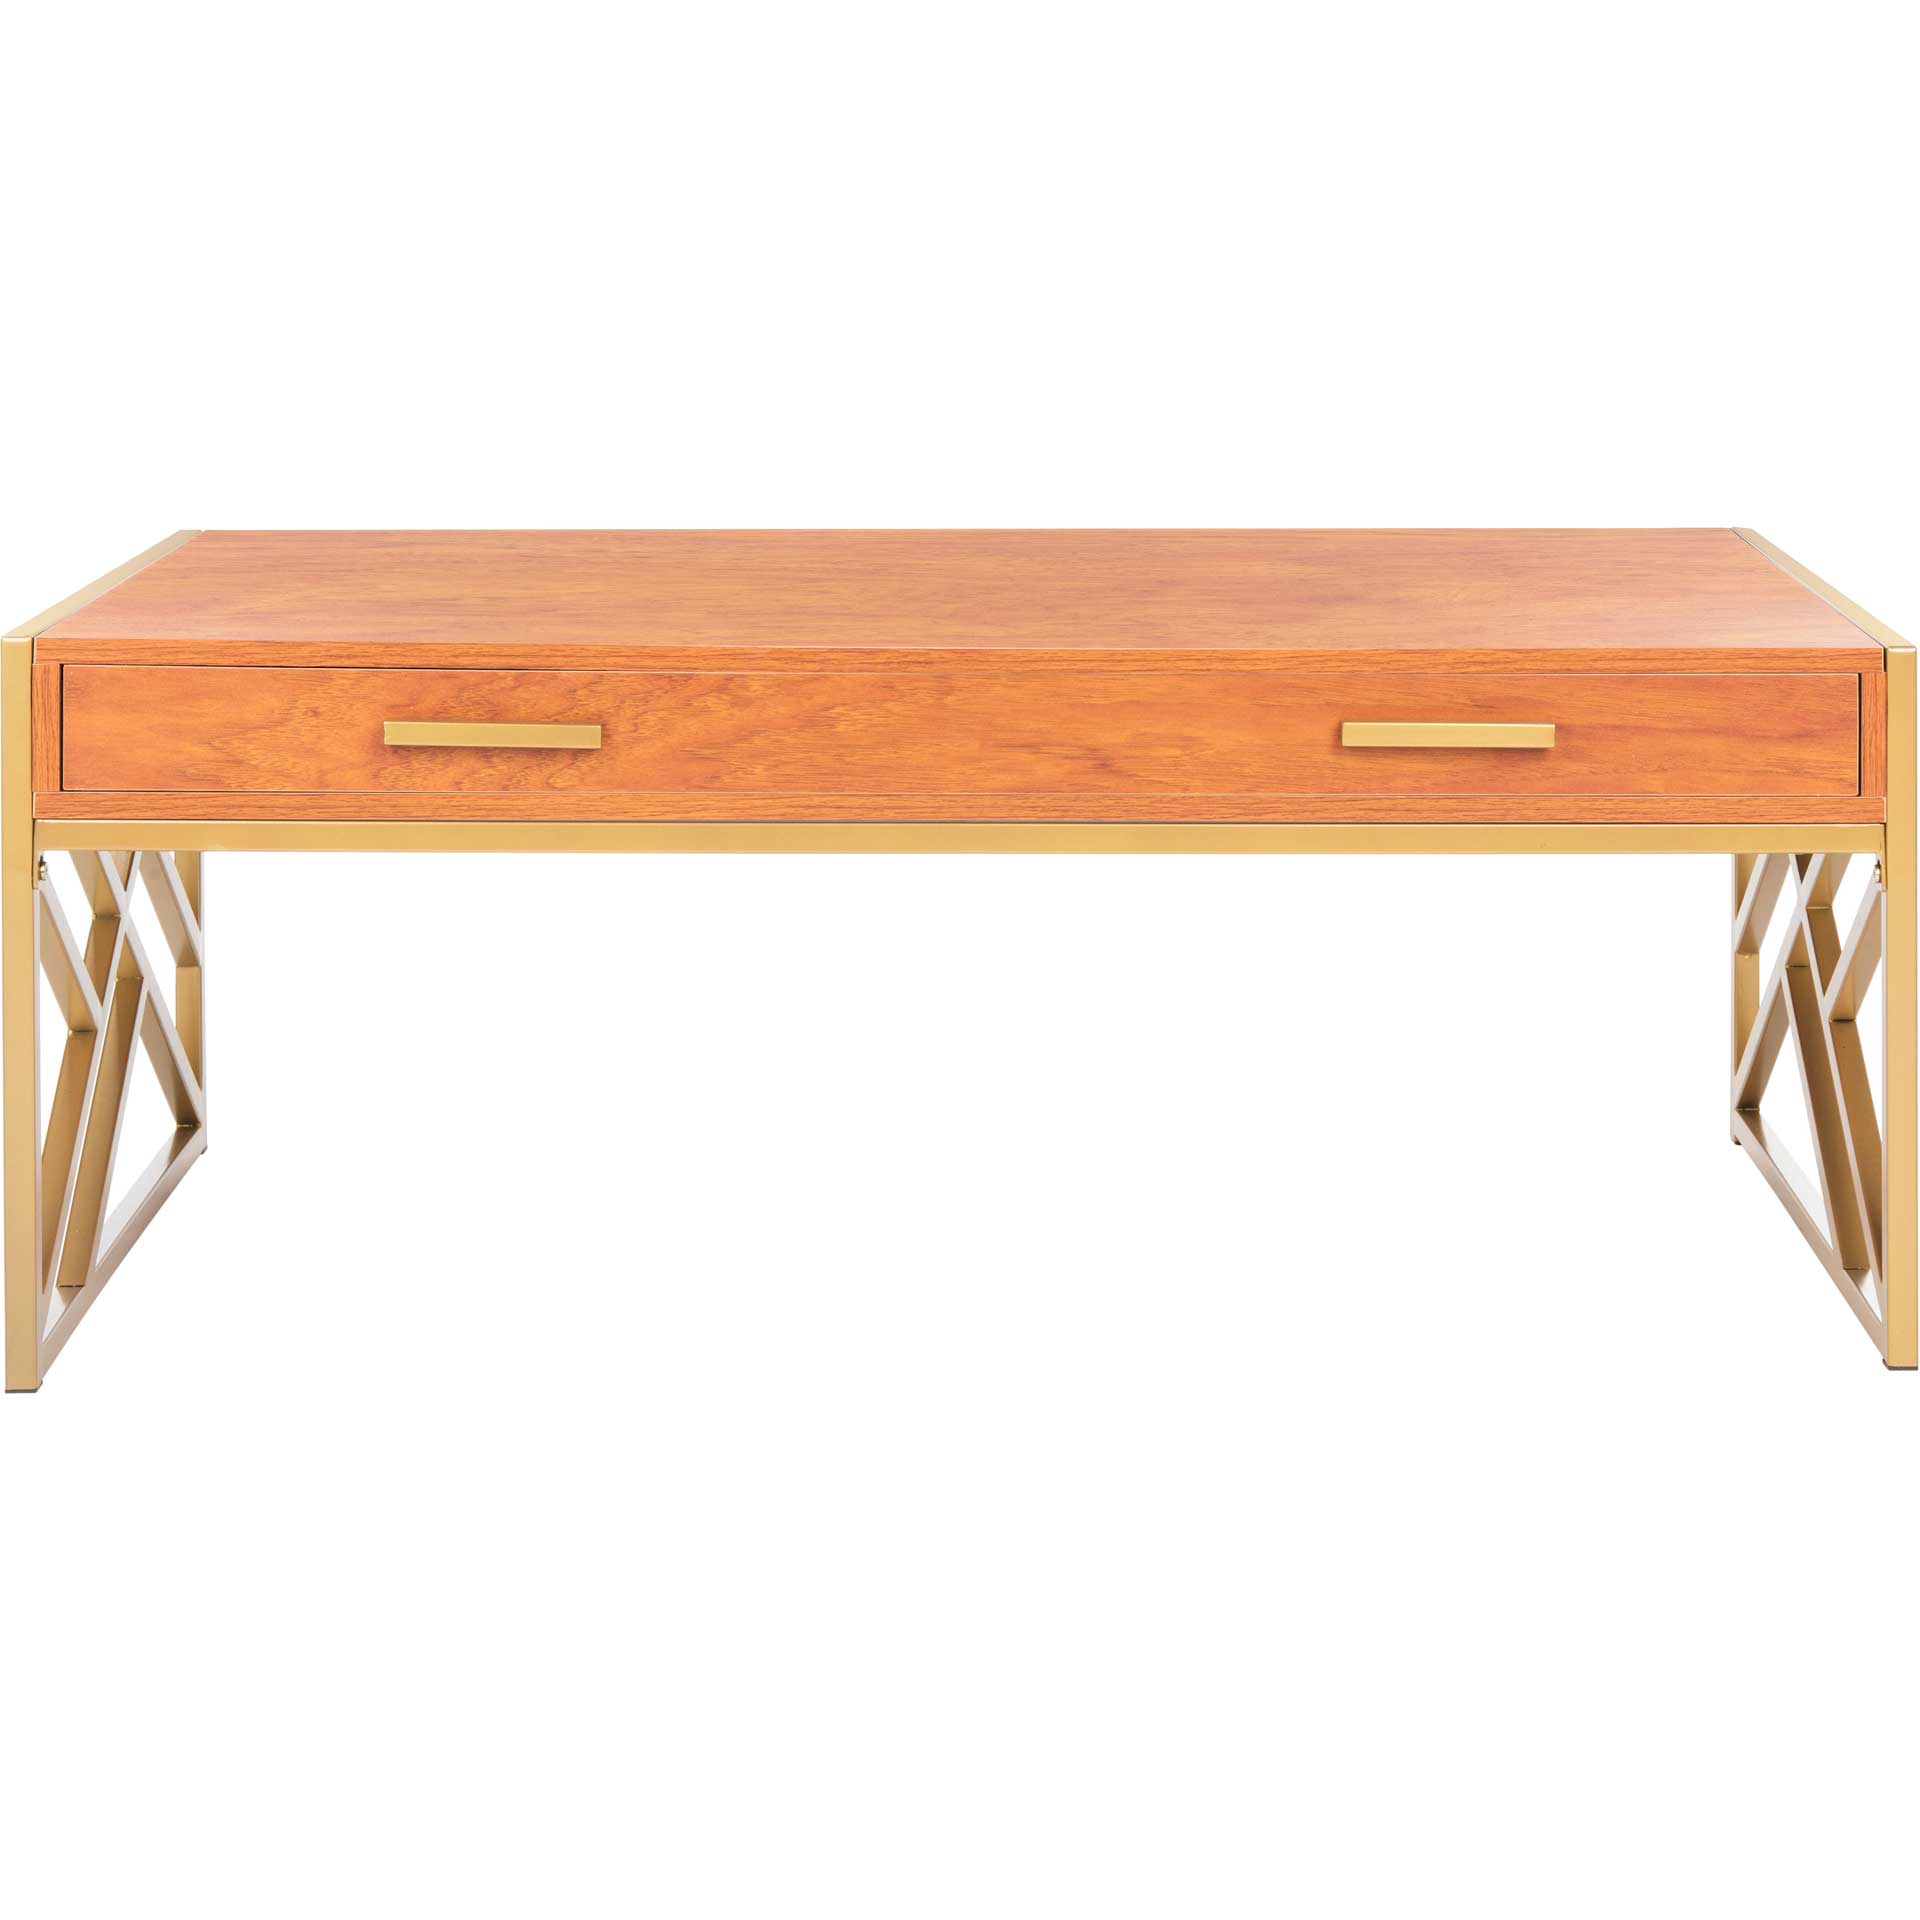 Elias 2 Drawer Coffee Table Natural/Gold